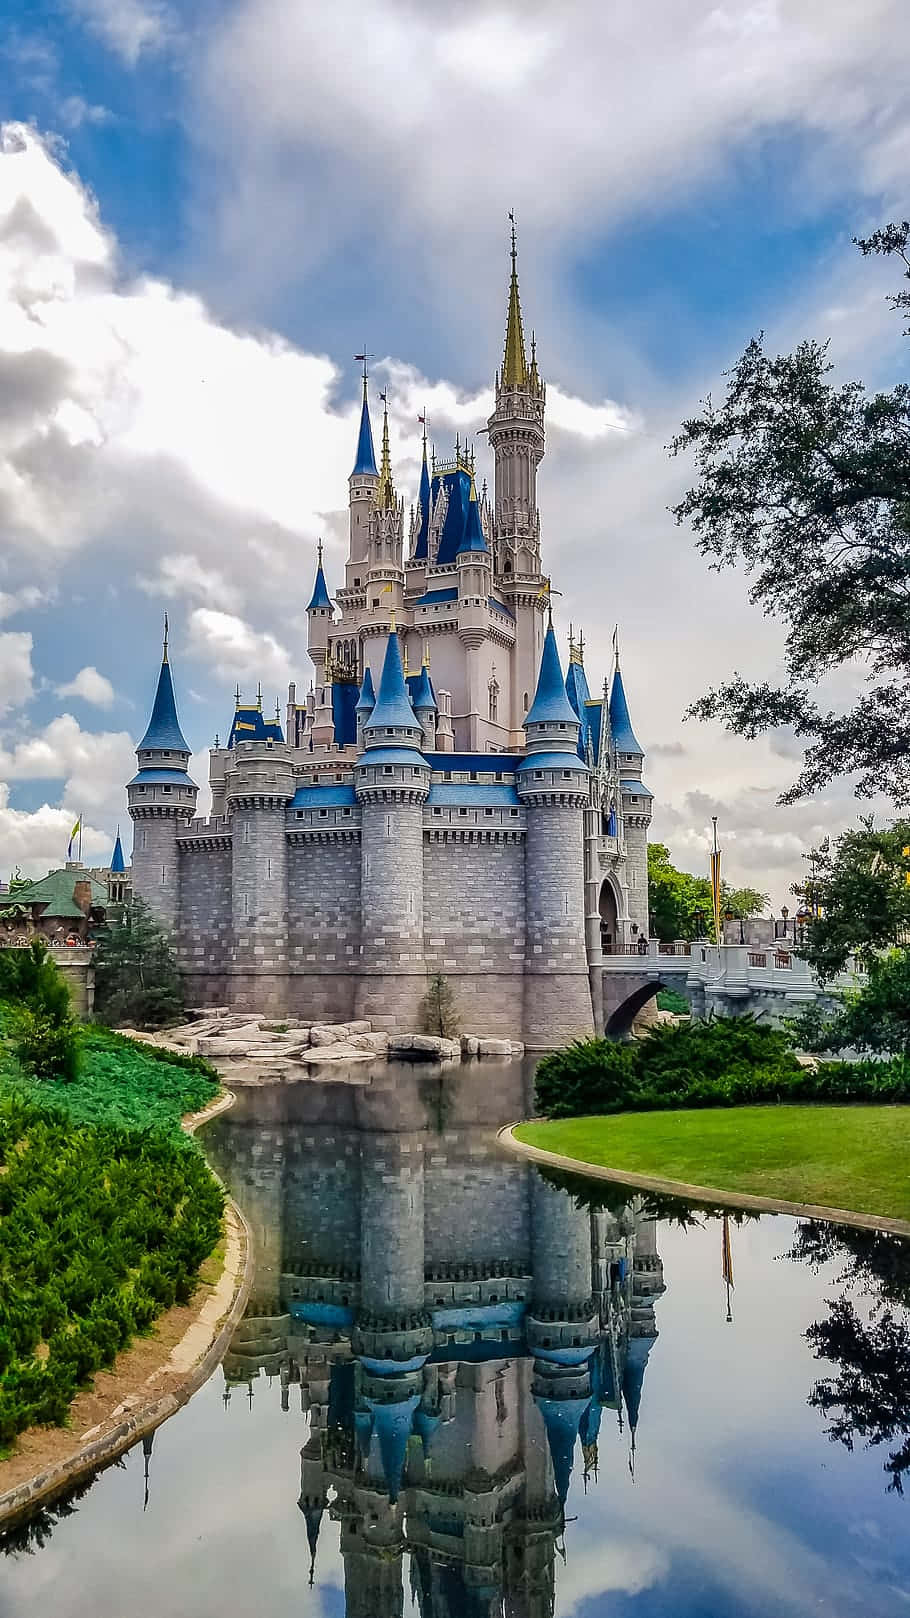 Cinderella Castle Is Reflected In A Pond